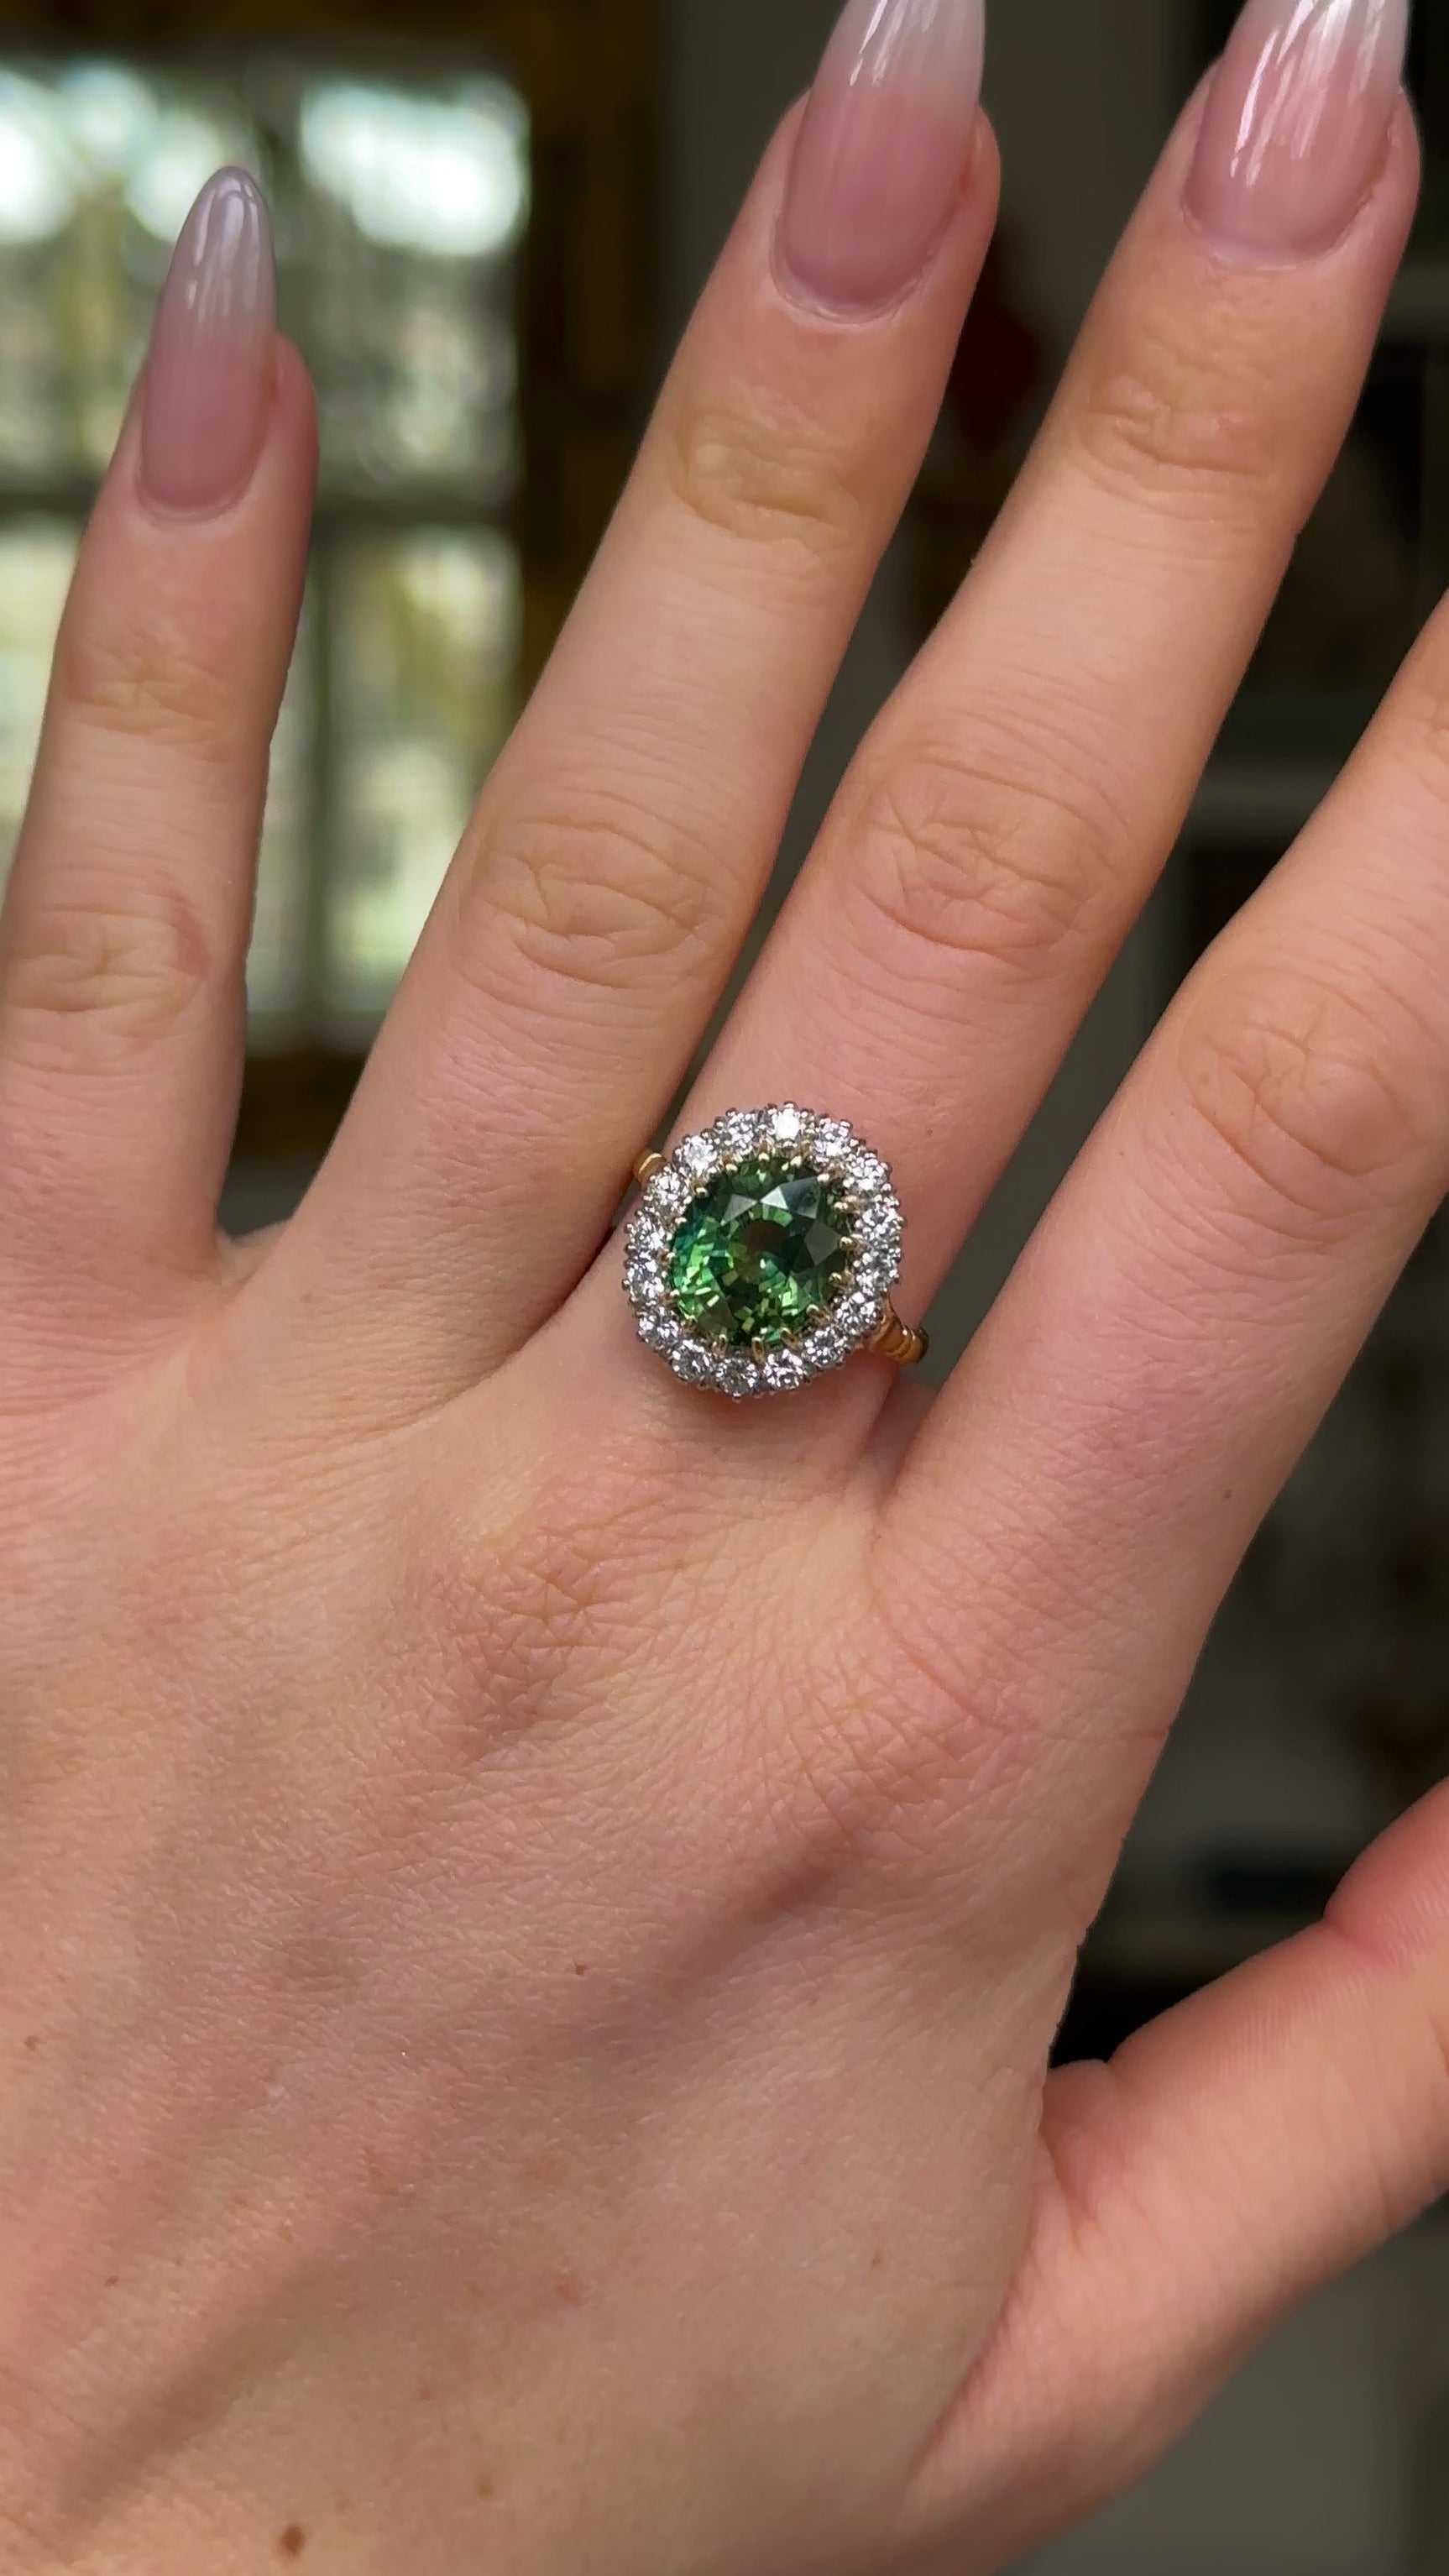 Vintage, 5ct Green Sapphire and Diamond Cluster Ring, 18ct Yellow Gold worn on hand and rotated to give perspective.